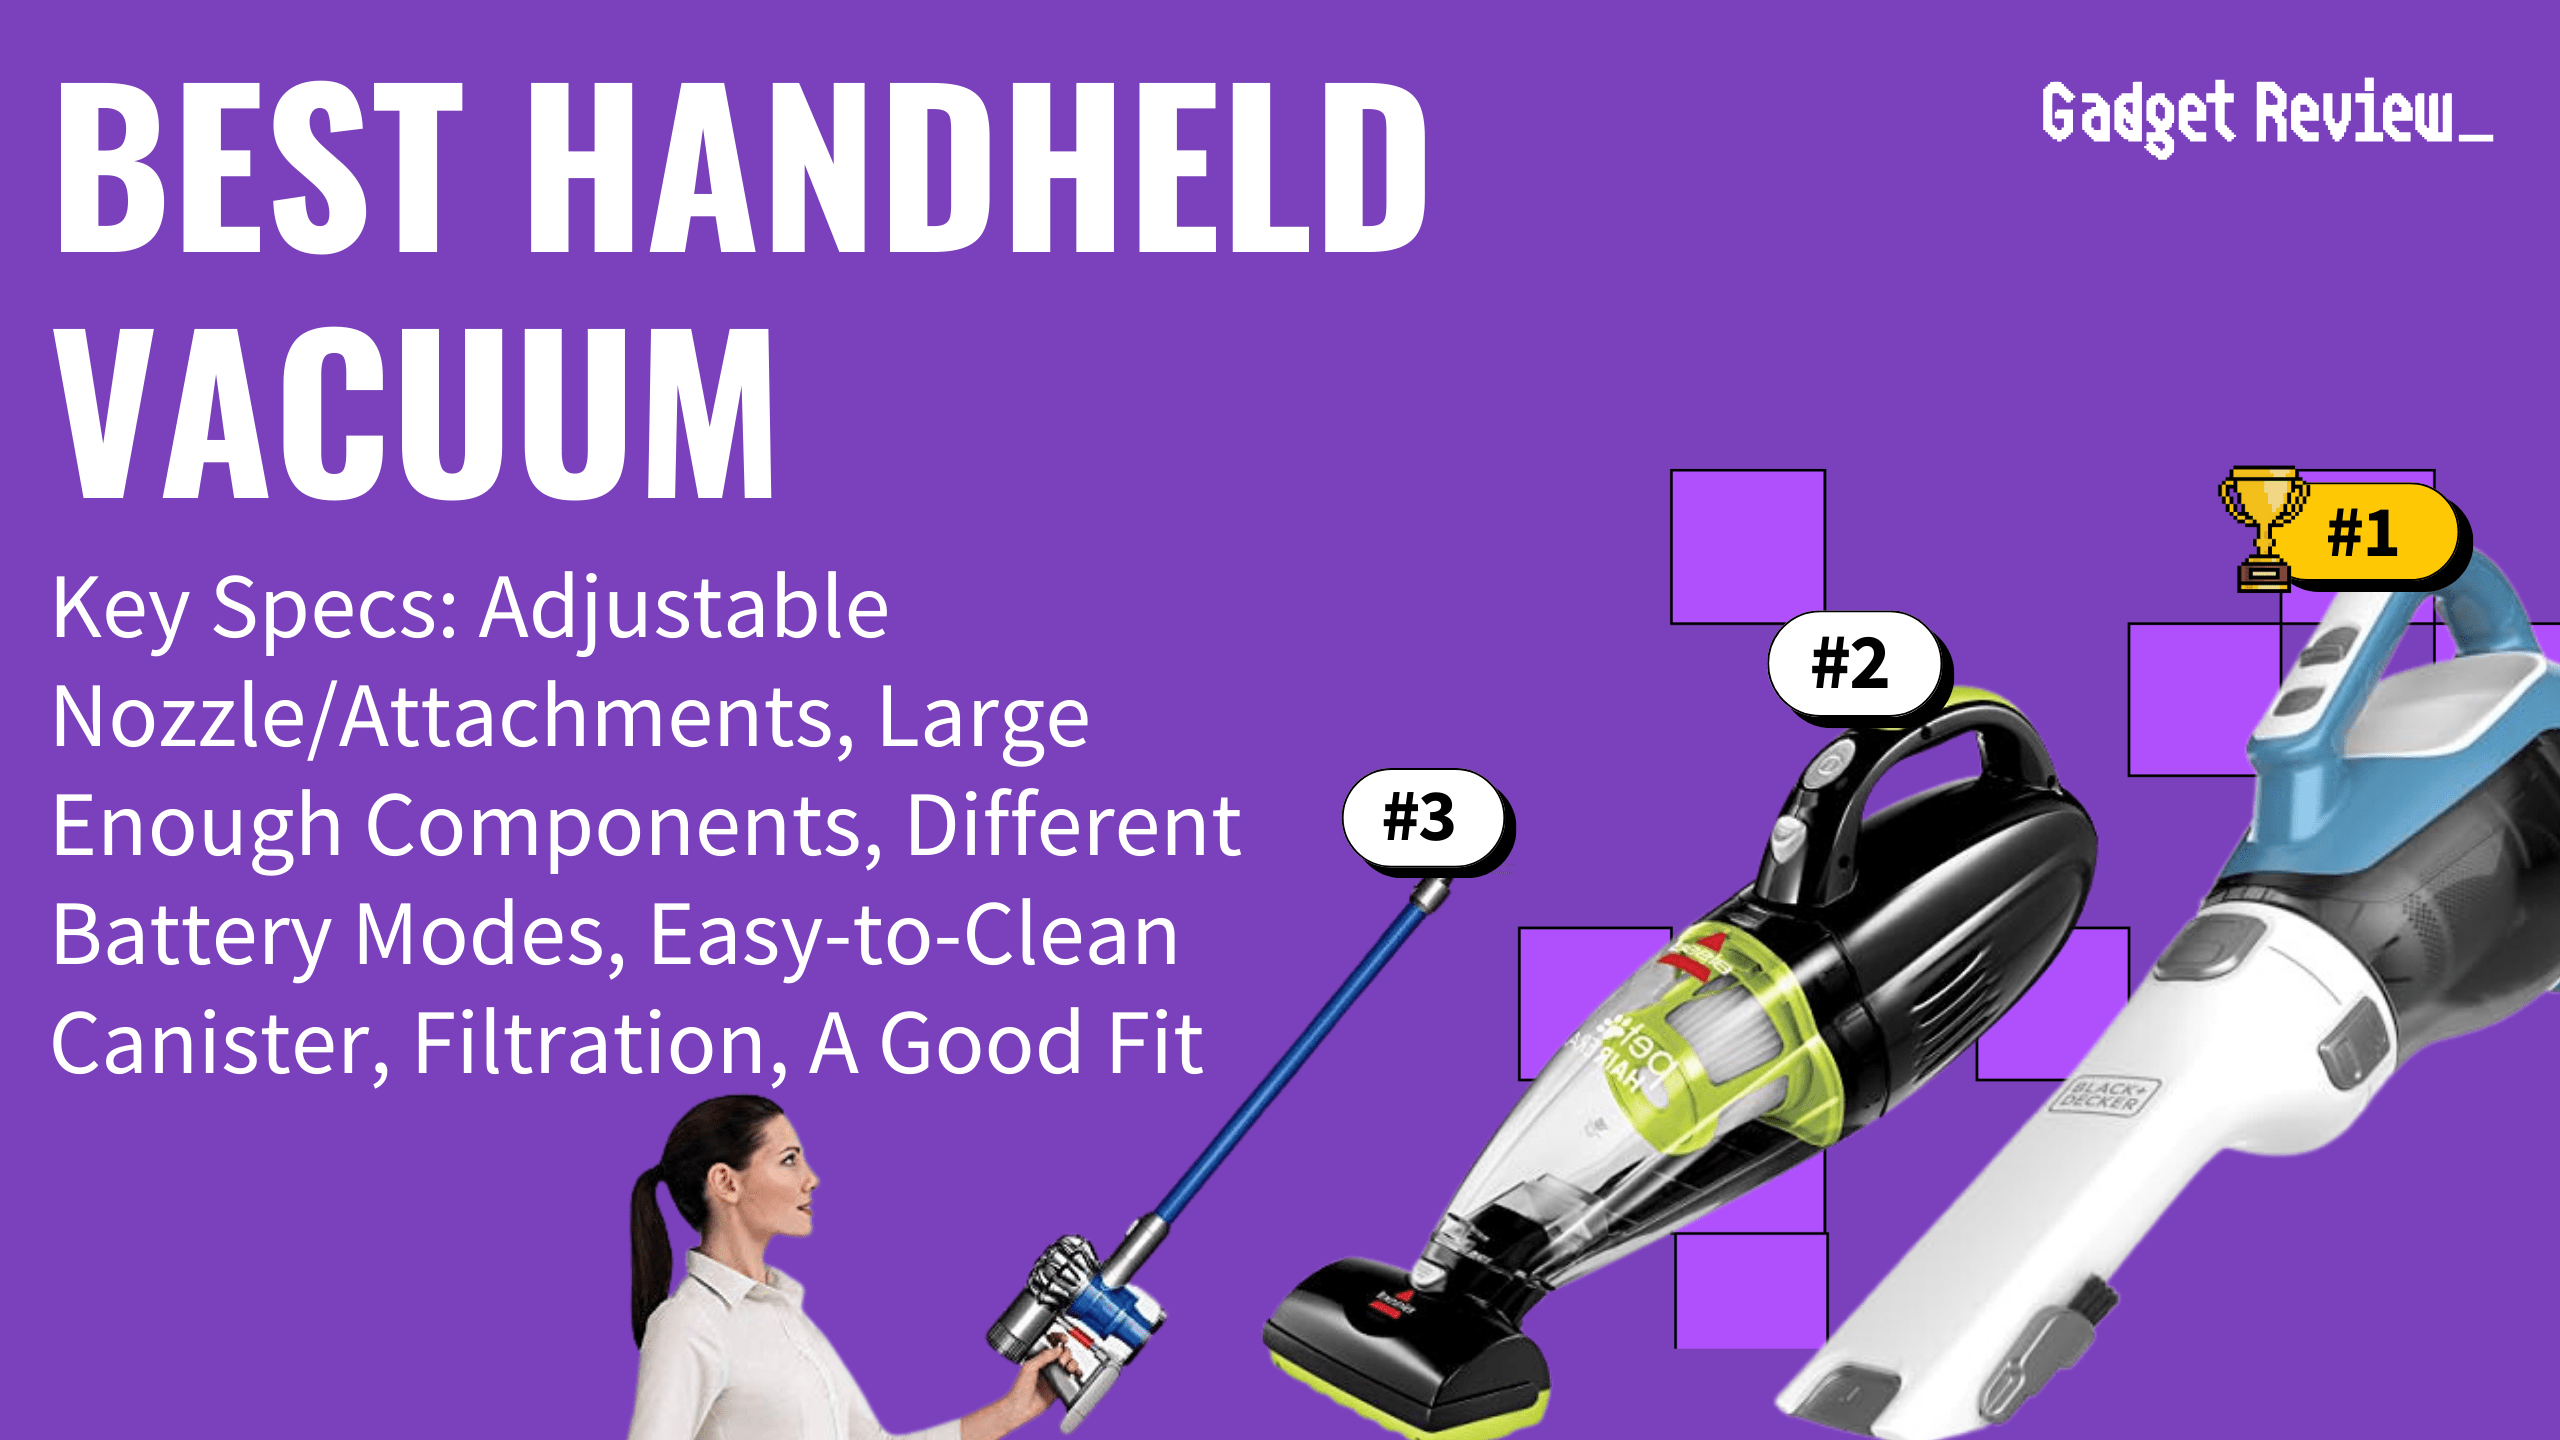 best handheld vacuum featured image that shows the top three best vacuum cleaner models